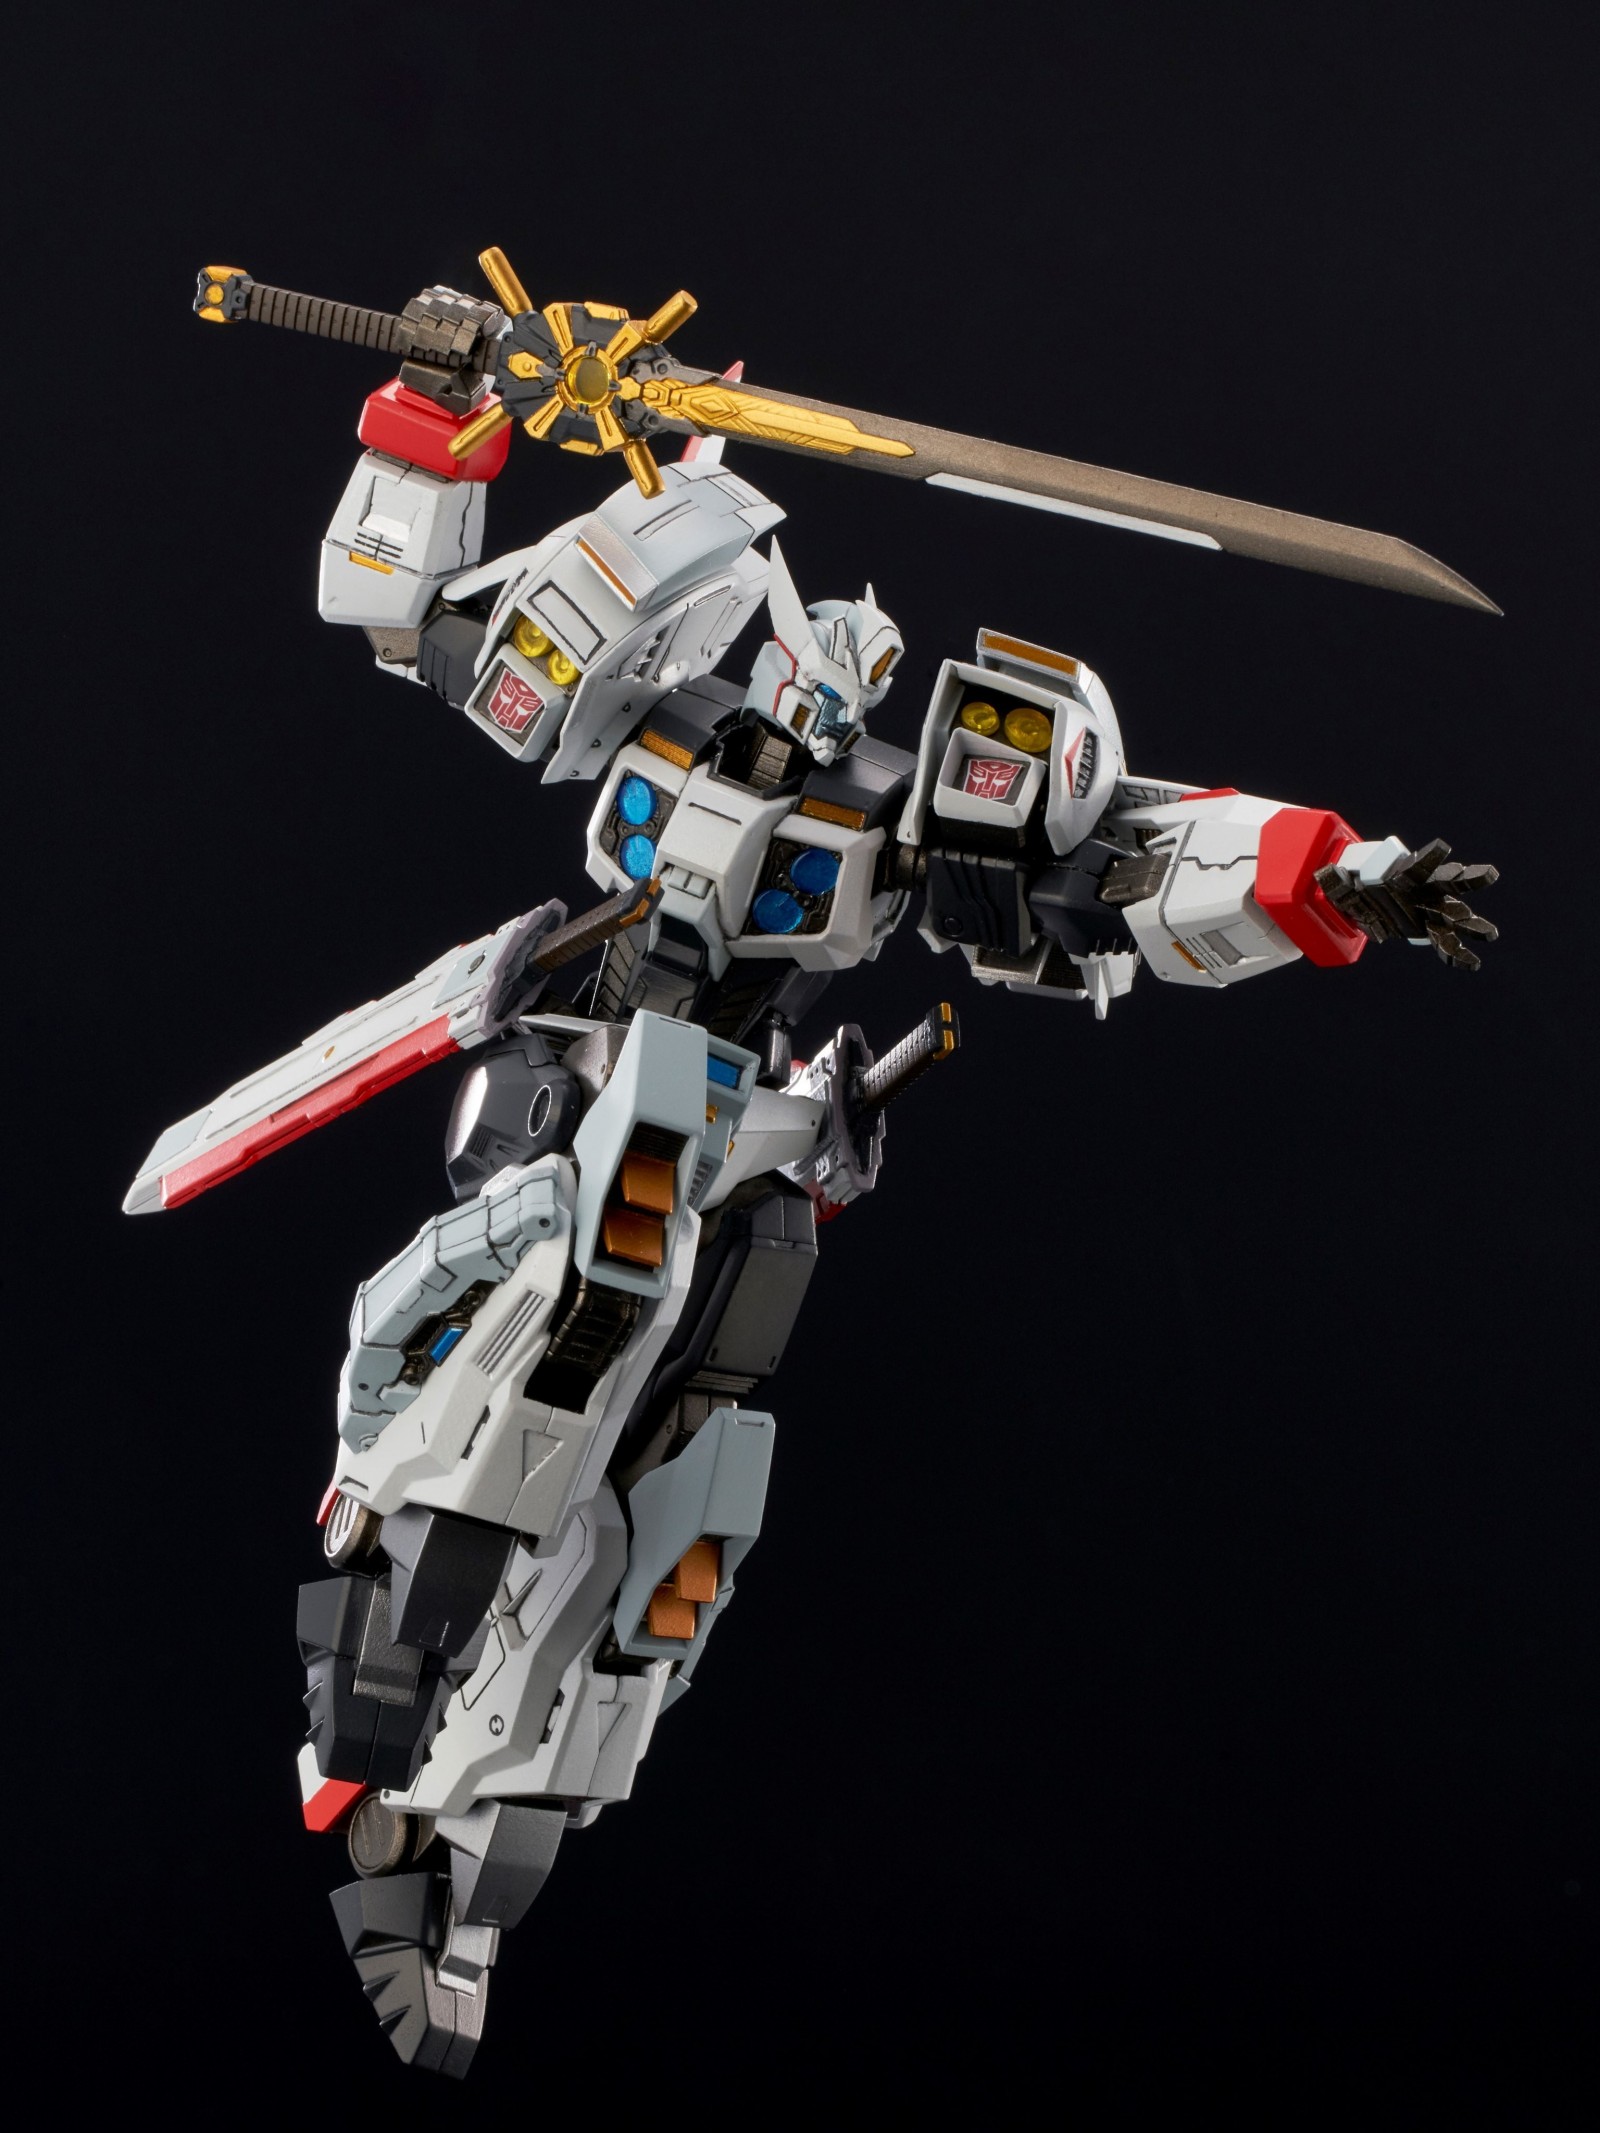 Transformers News: Flame Toys Transformers Skywarp and Drift Up for Preorder